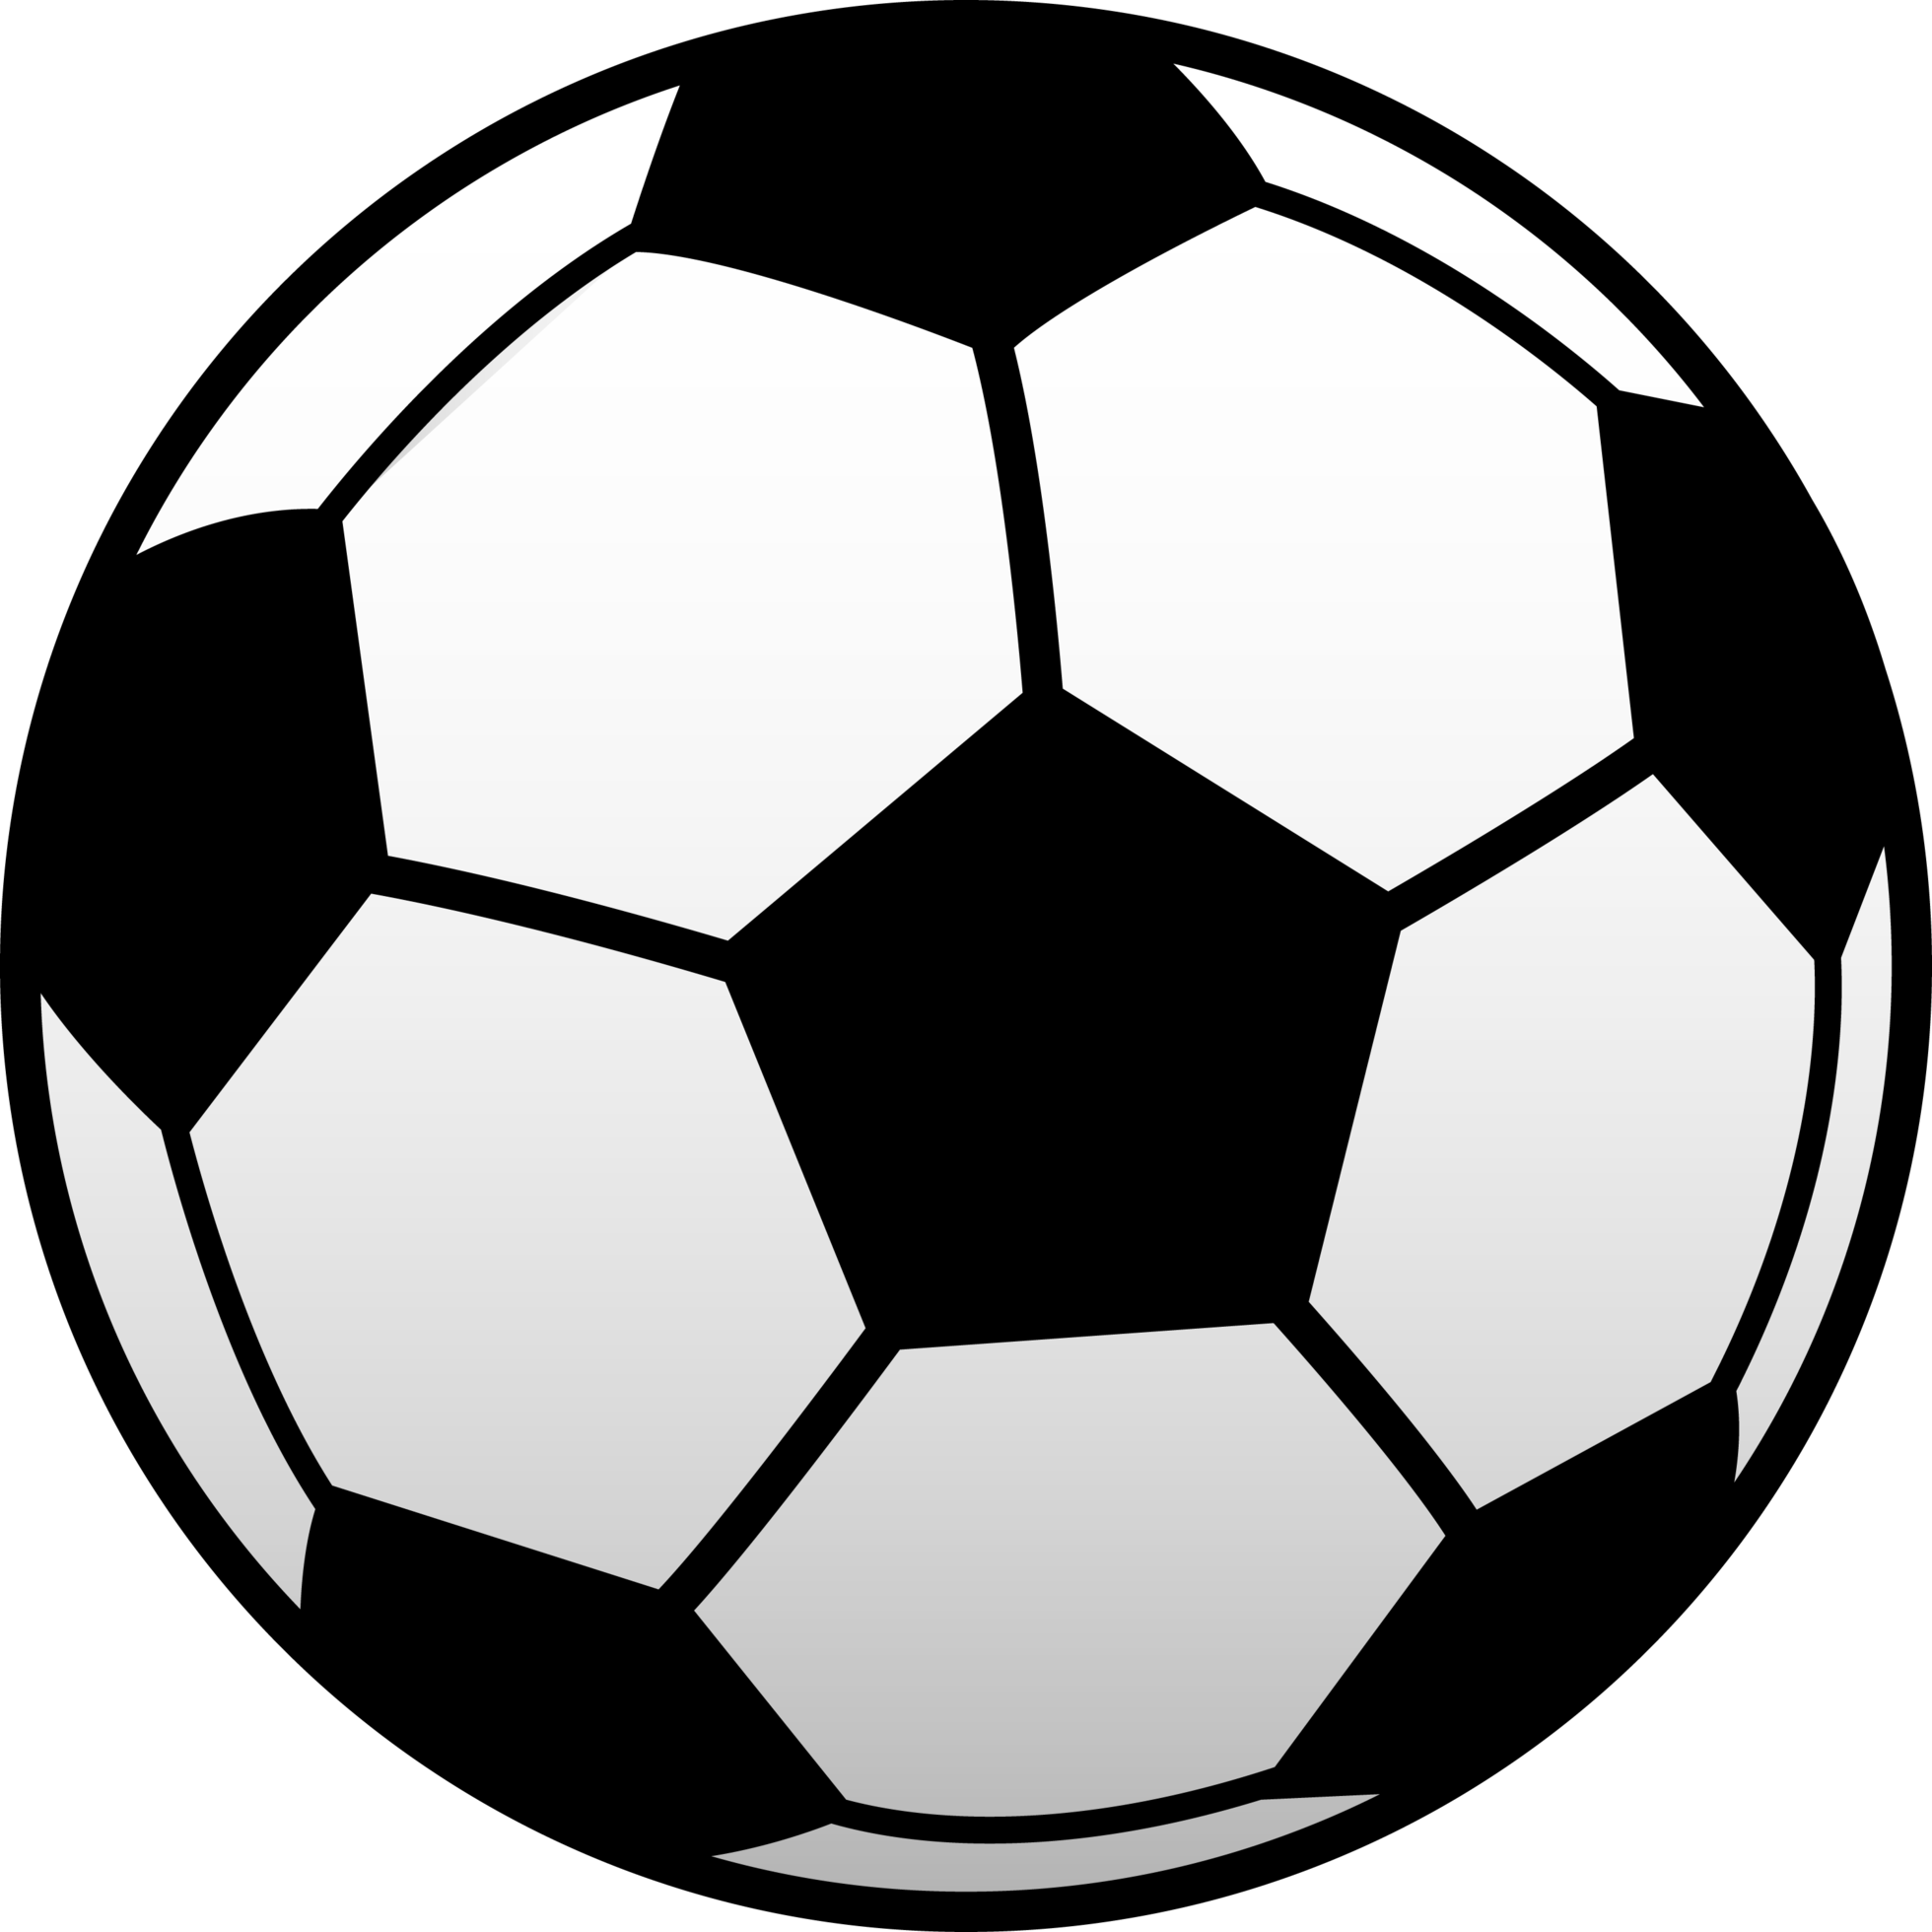 Cartoon Soccer Balls Pictures - Cliparts.co